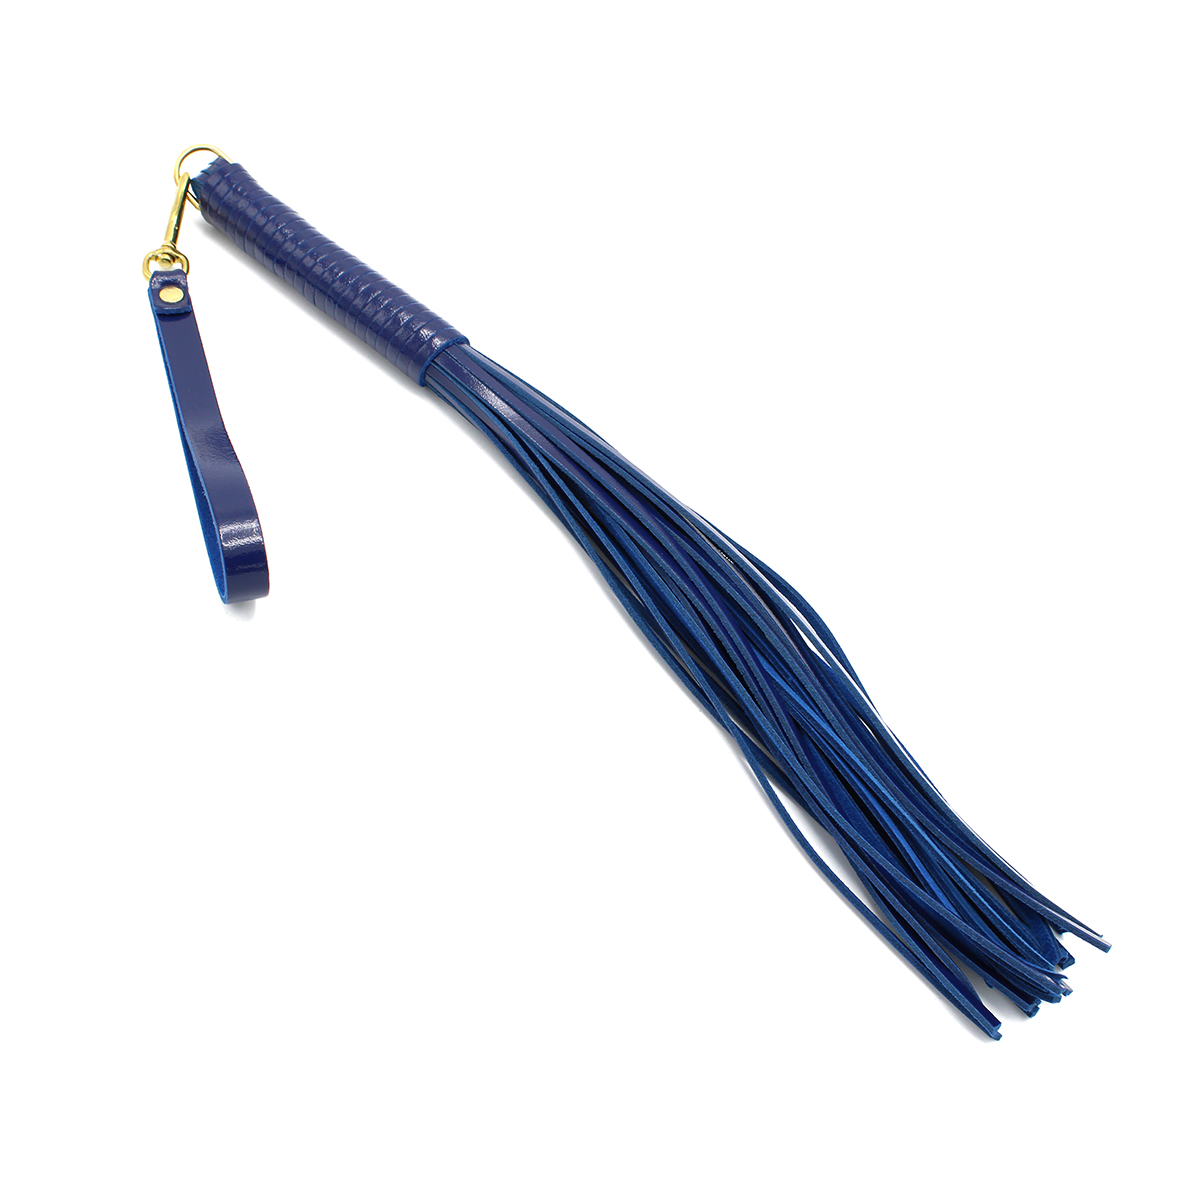 Blue-leather-whip-with-handle-134-KIO-0314-2